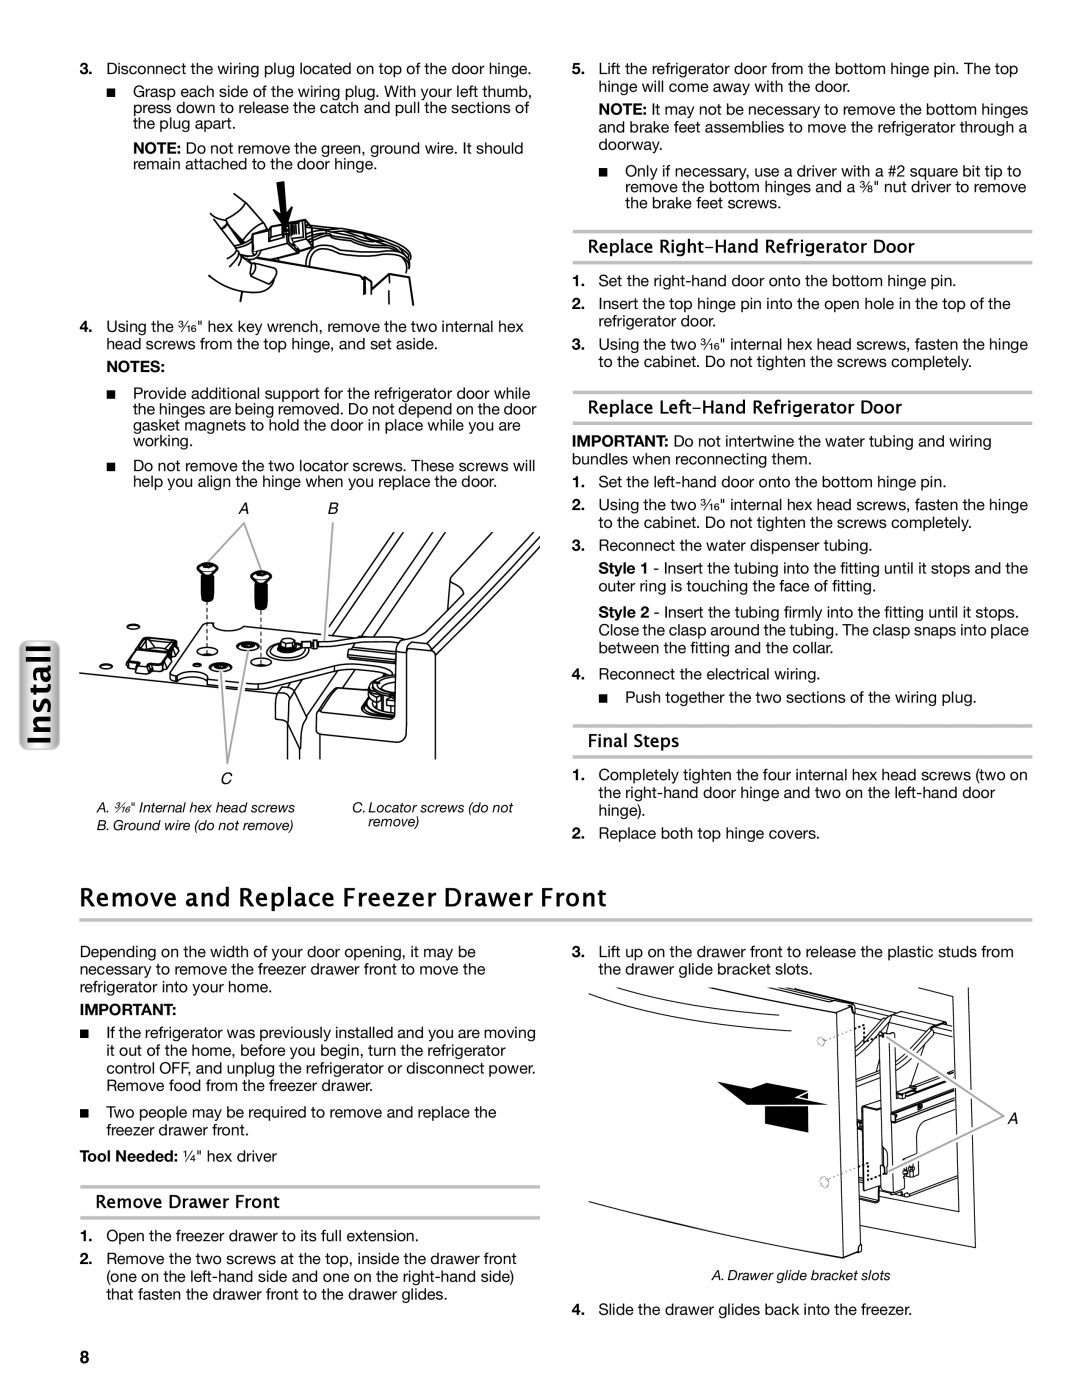 Maytag W10558103A manual Remove and Replace Freezer Drawer Front, Replace Right-Hand Refrigerator Door, Final Steps 